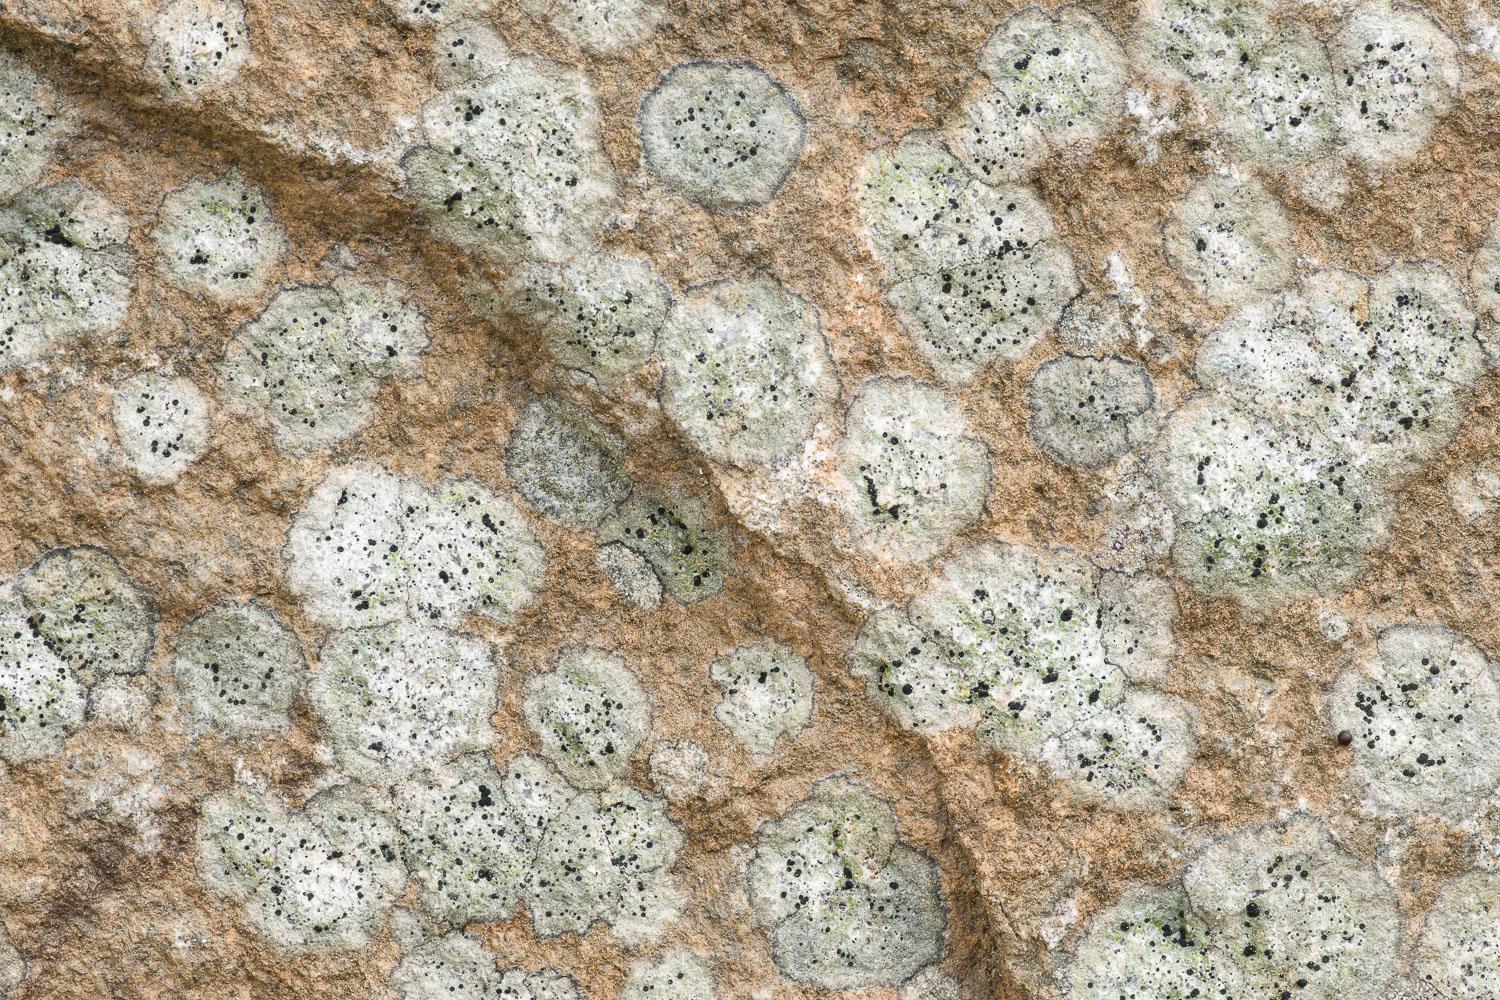 Close-up photograph of the circular patterns created by lichen growing on a rock. Image #3035